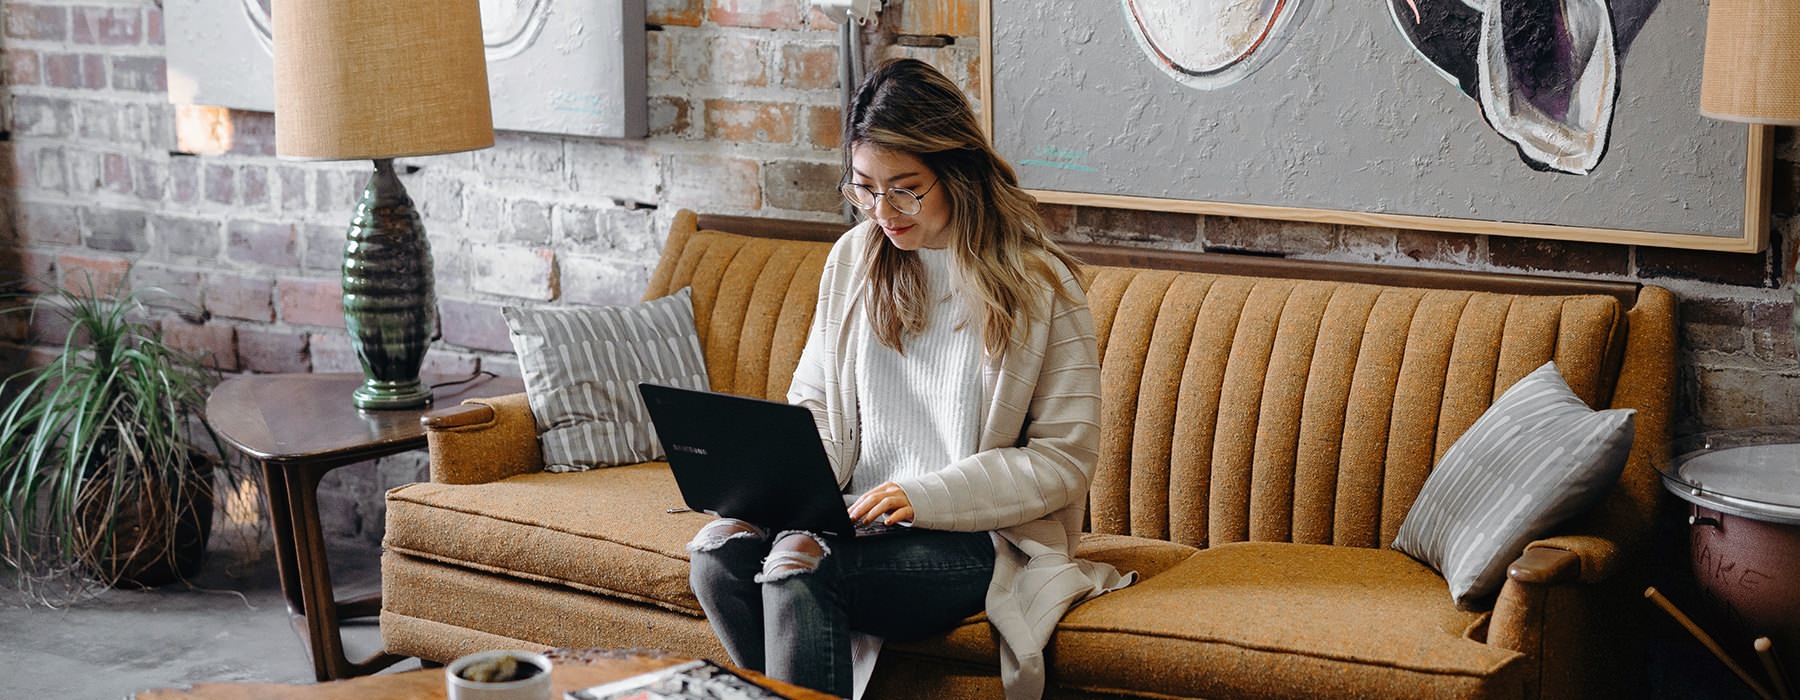 resident sits on cafe couch and works on her laptop